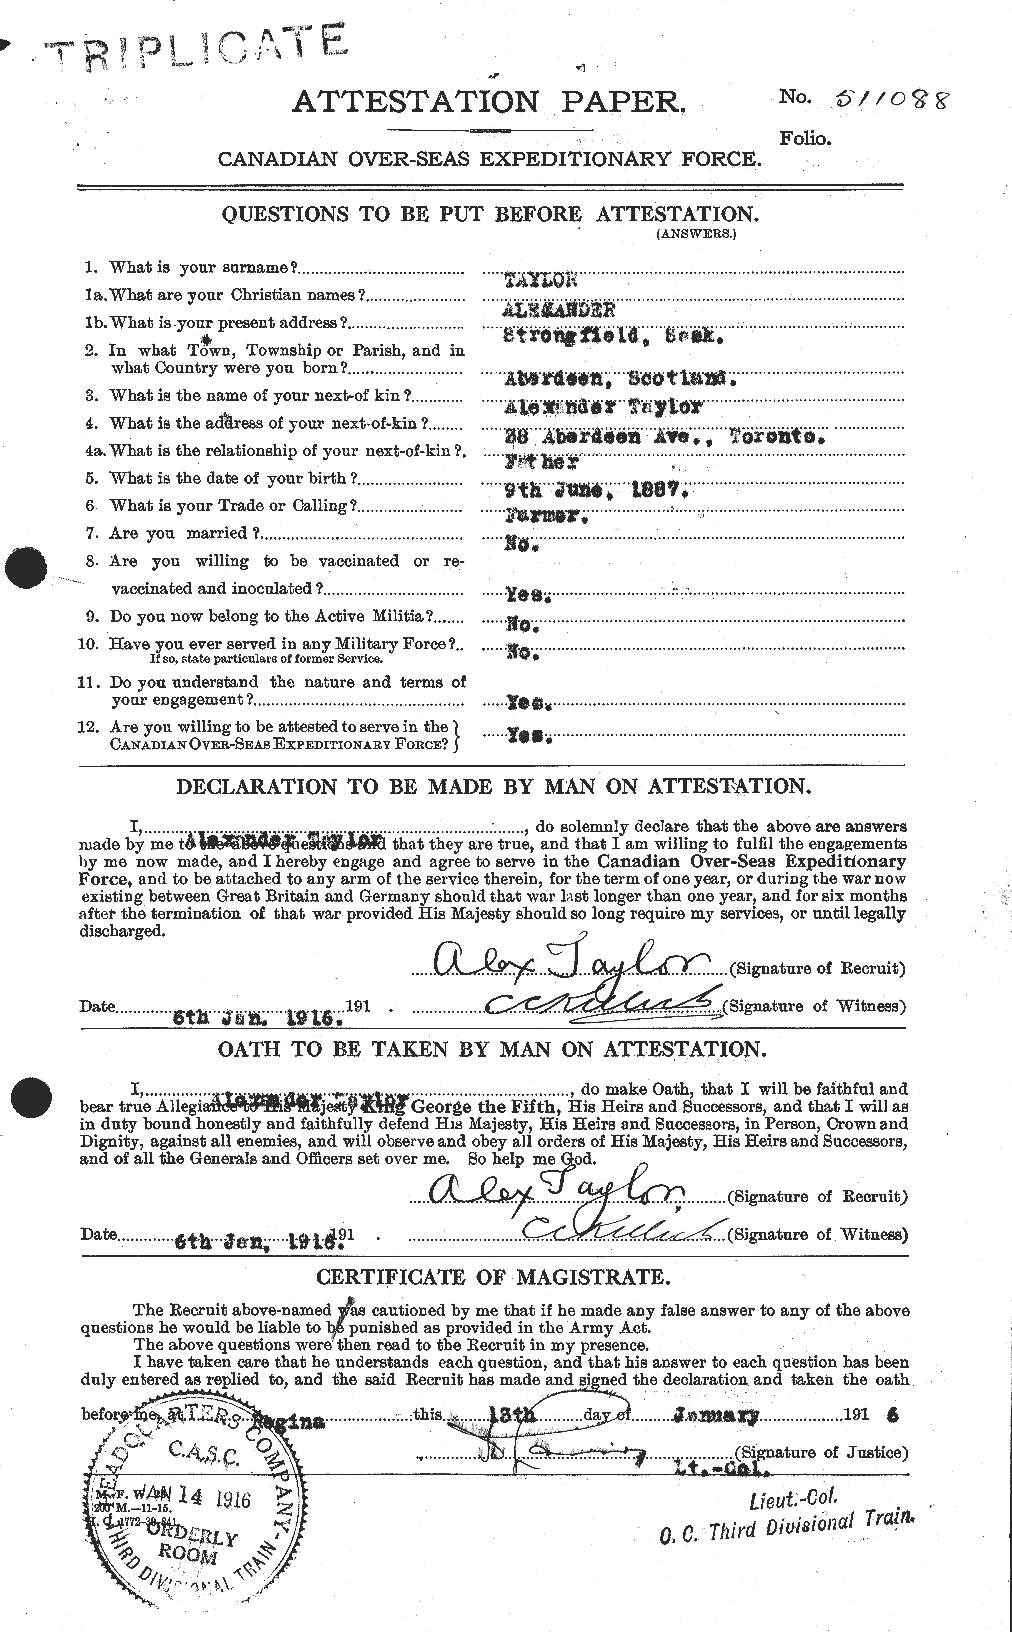 Personnel Records of the First World War - CEF 626142a